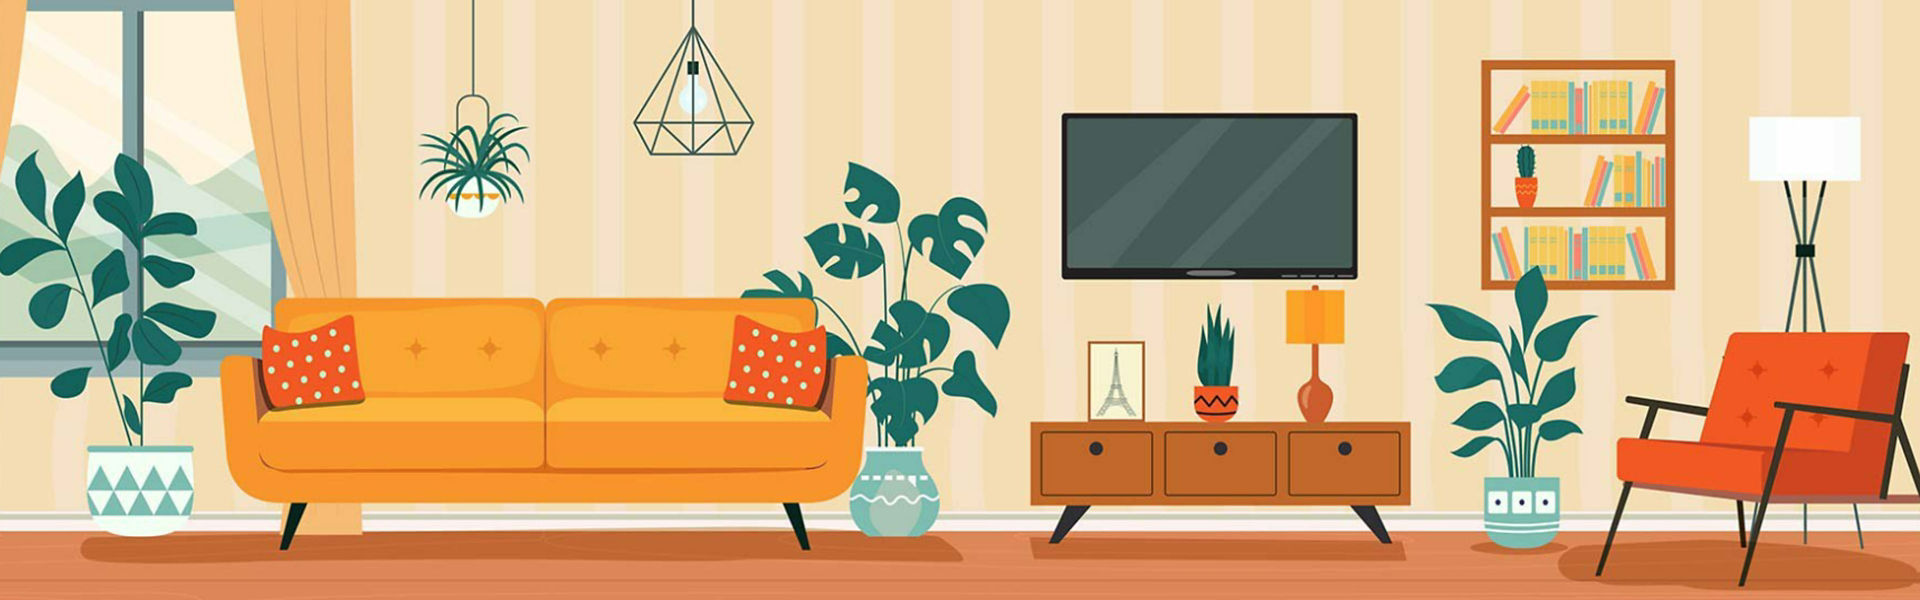 An illustration of a cosy living room decorated in yellows and oranges